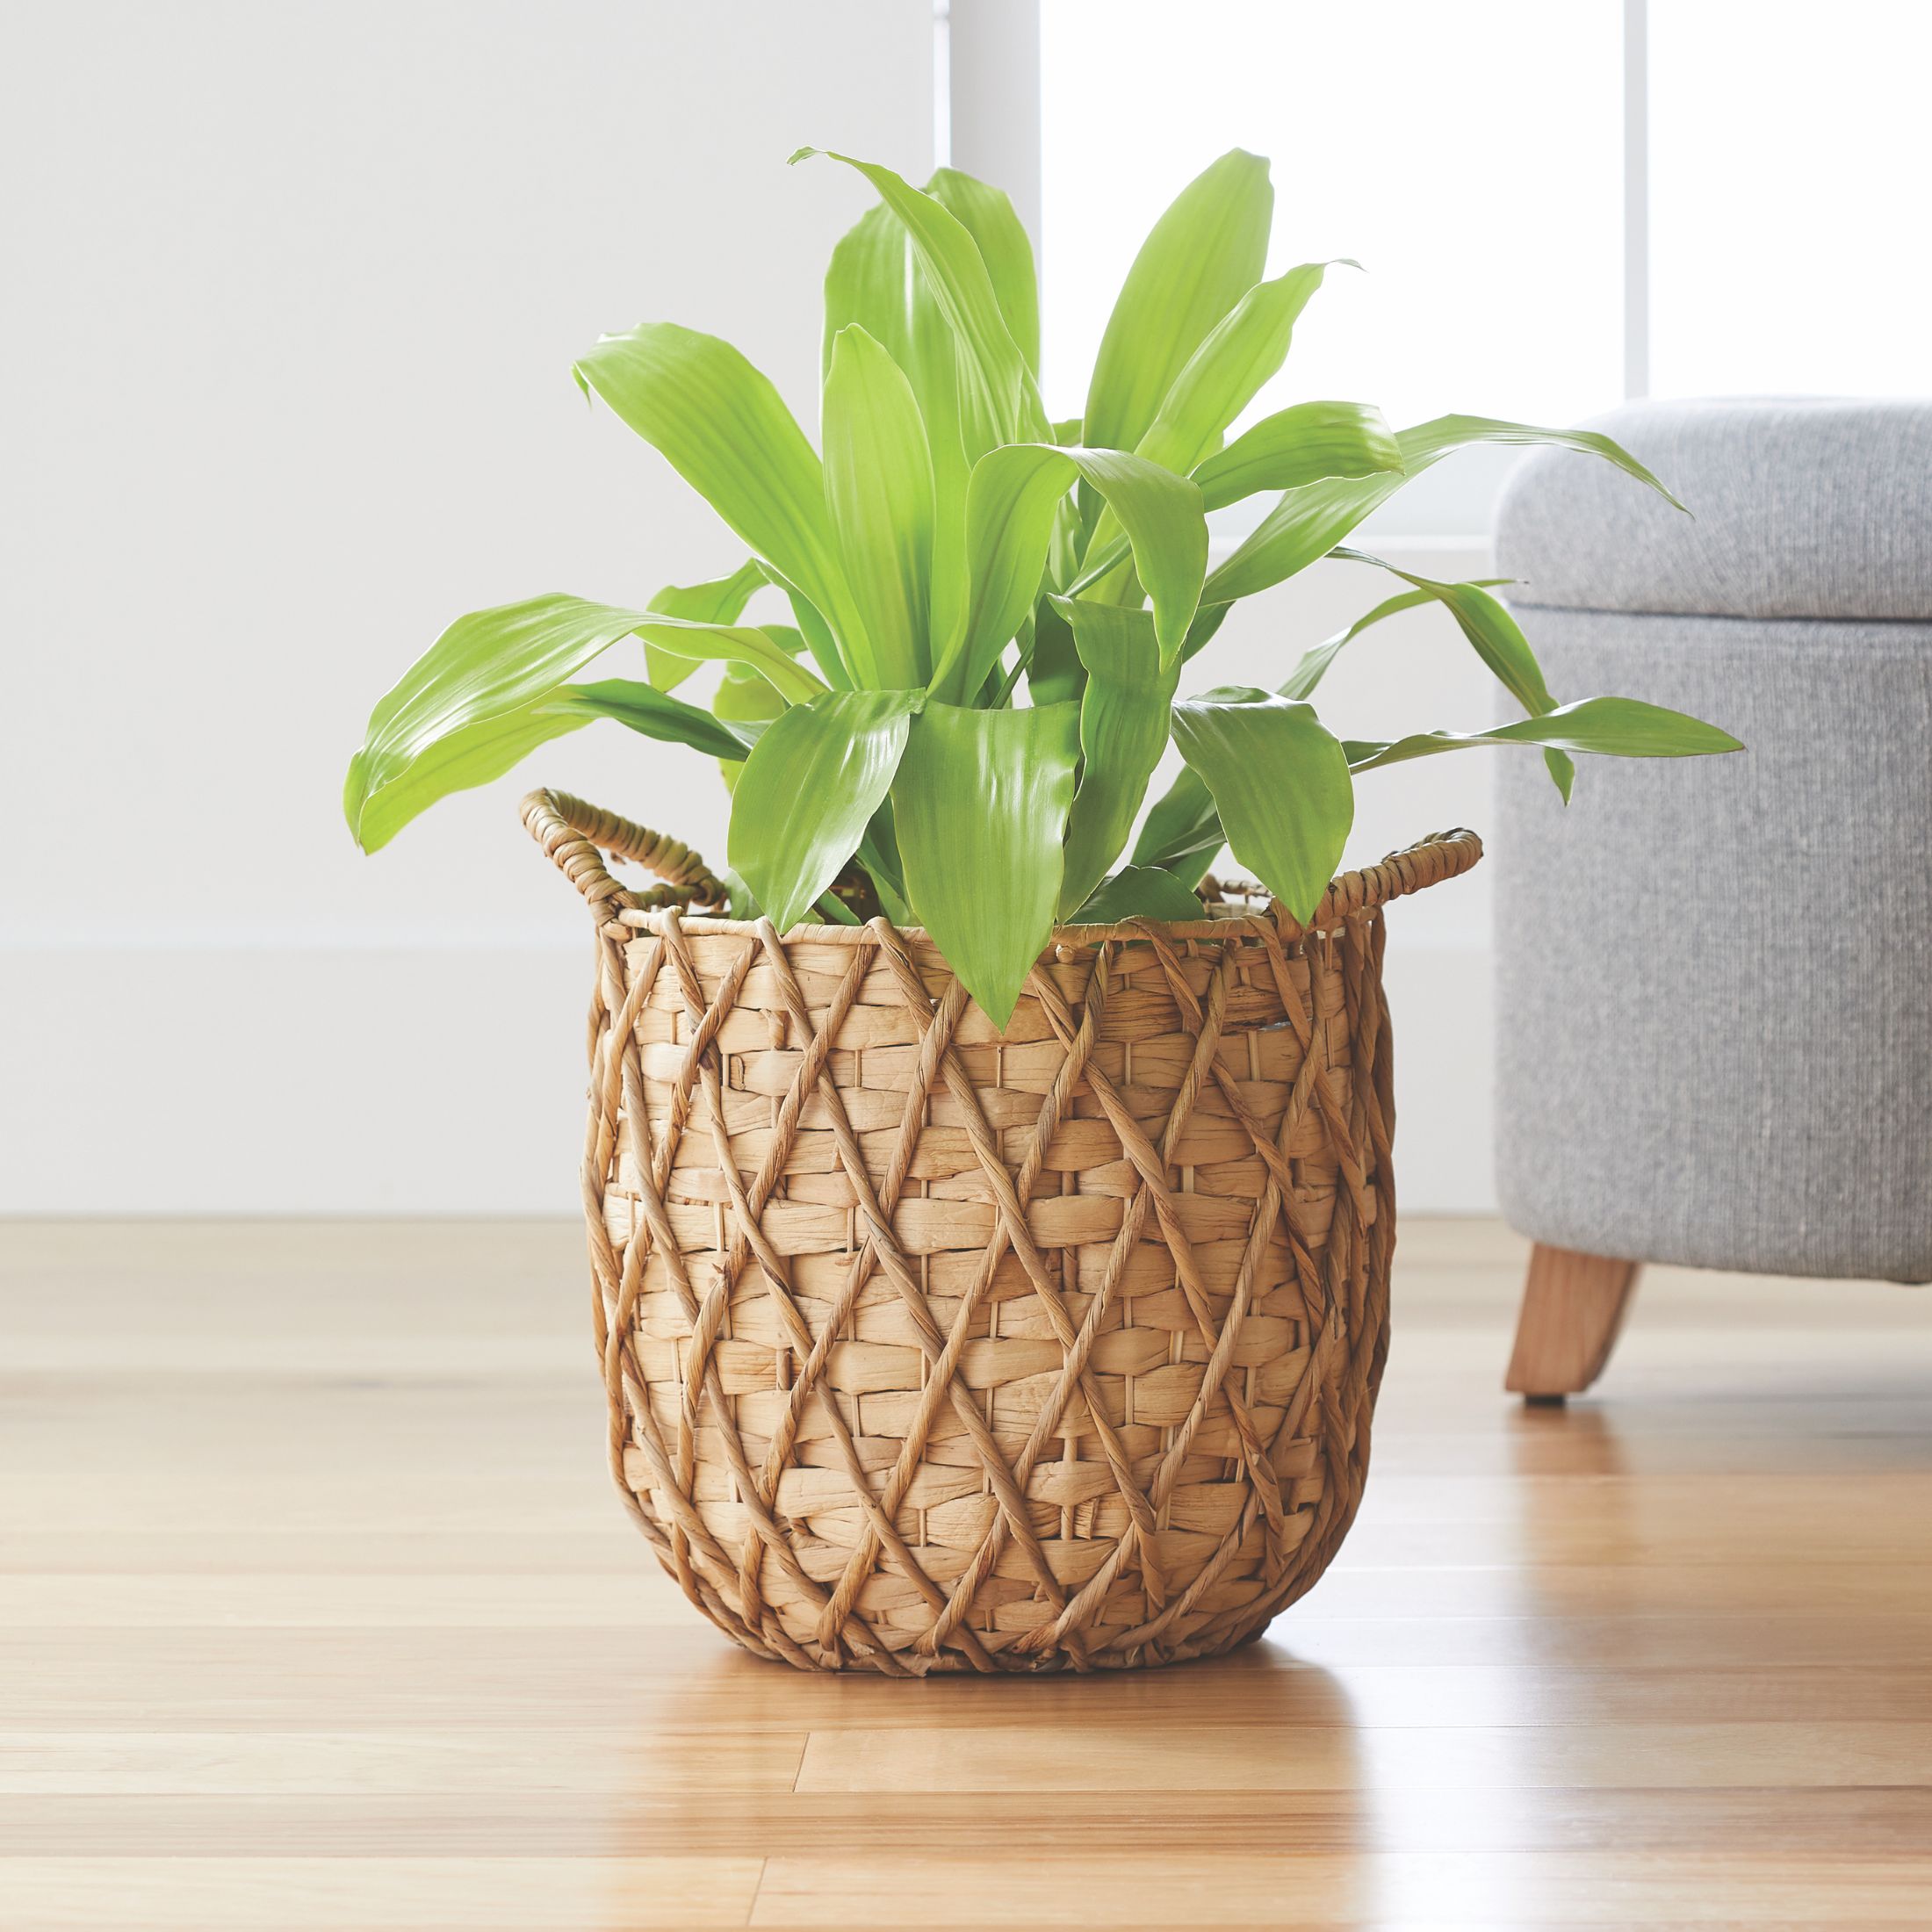 Better Homes & Gardens 11" Round Natural Water Hyacinth Basket Planter - image 1 of 5